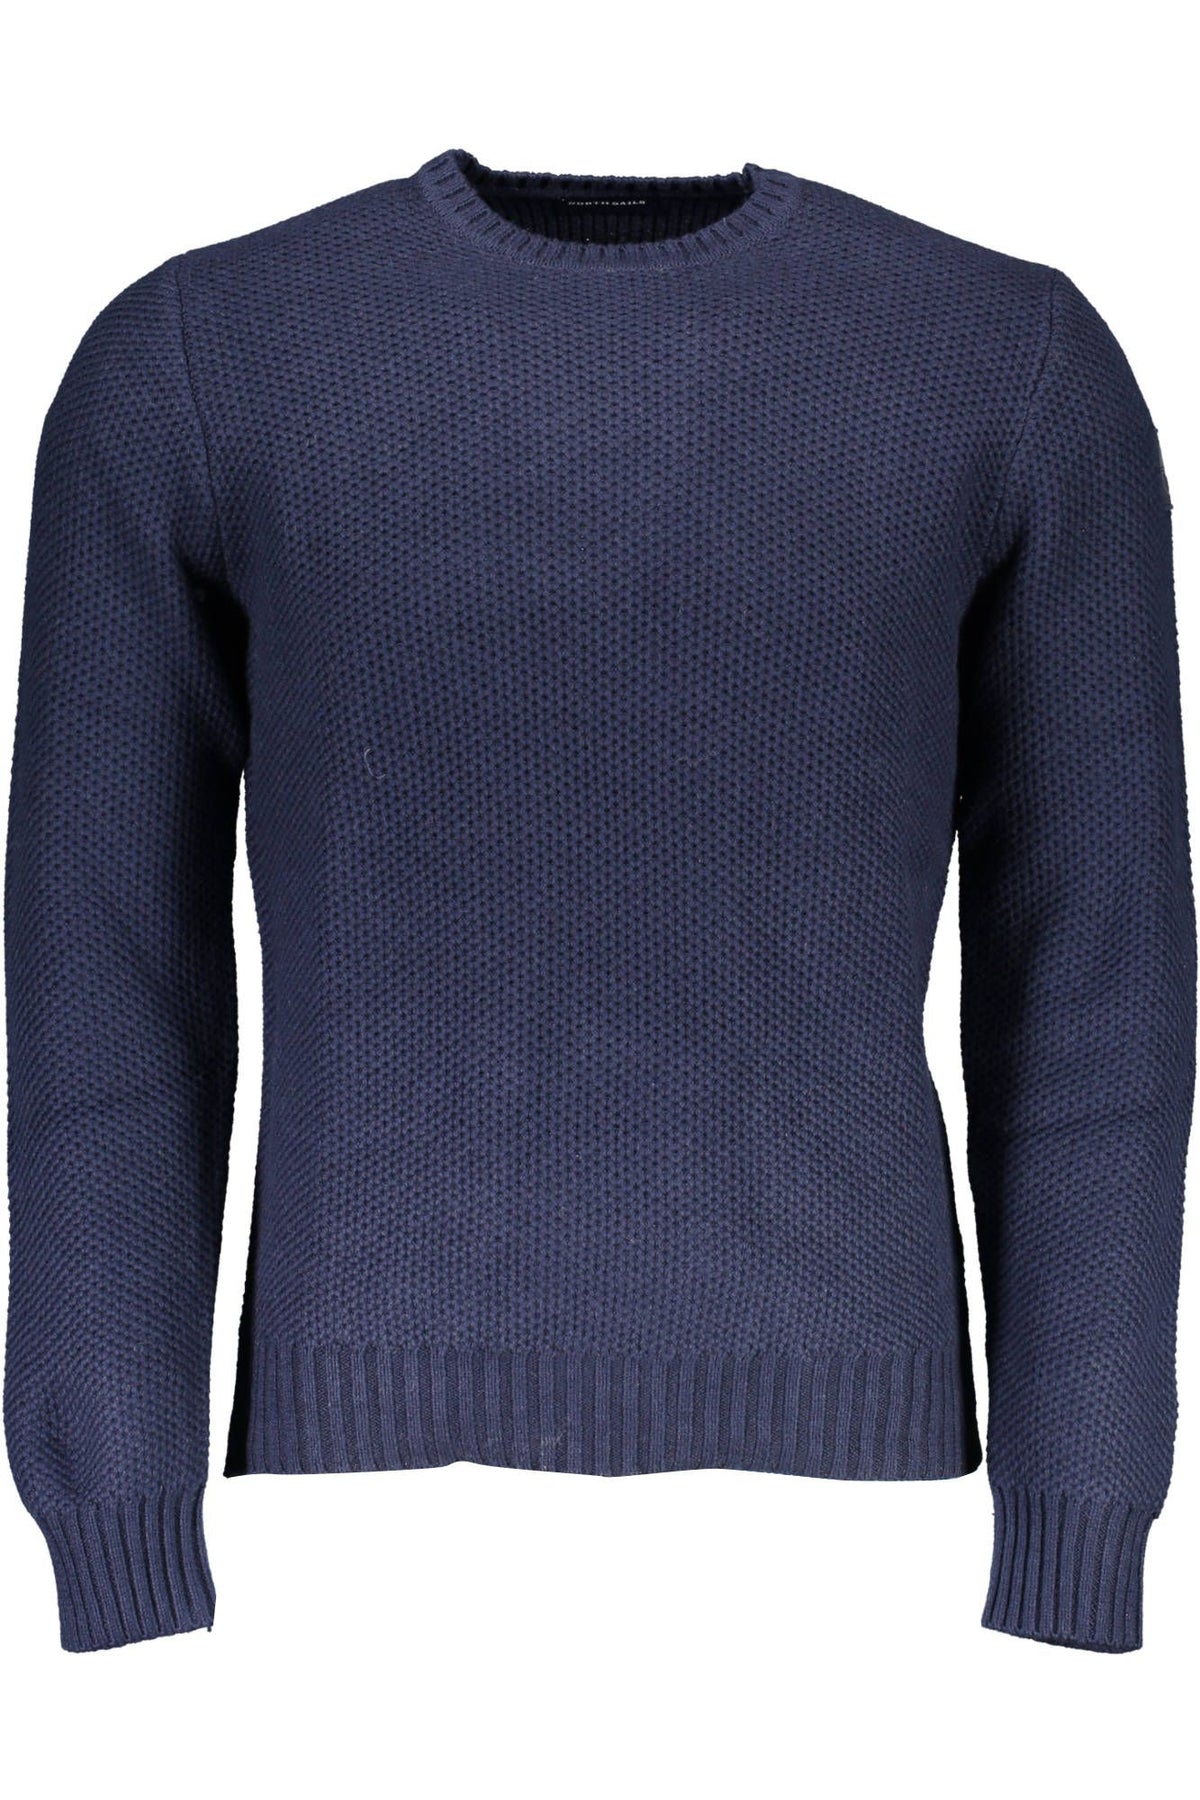 North Sails Blue Round Neck Sweater with Contrasting Details